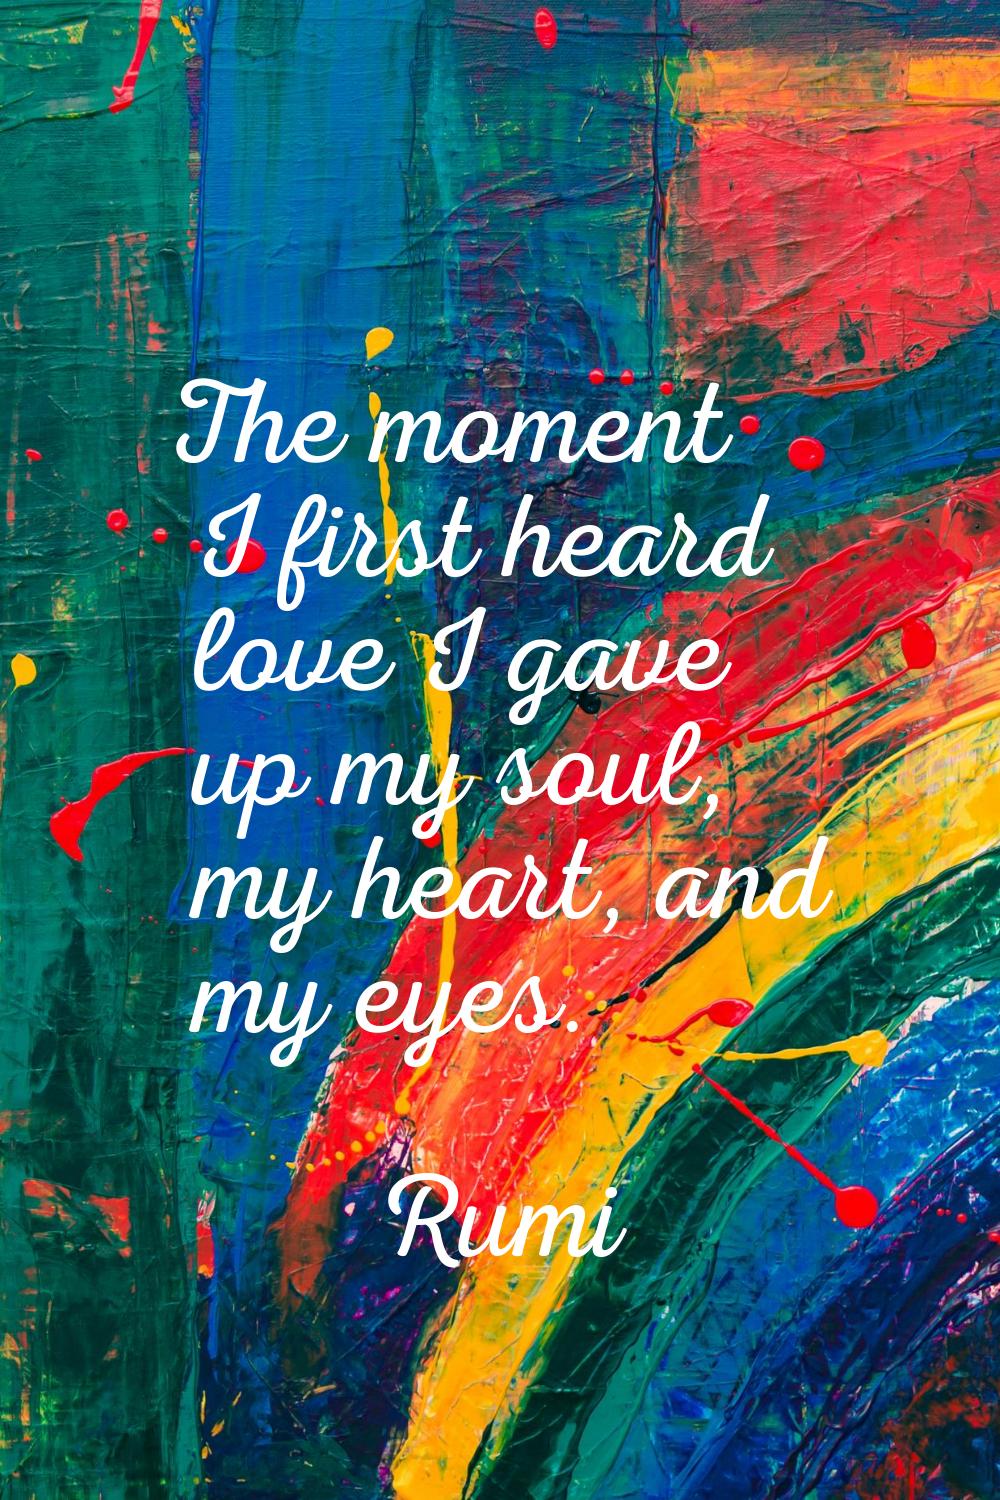 The moment I first heard love I gave up my soul, my heart, and my eyes.